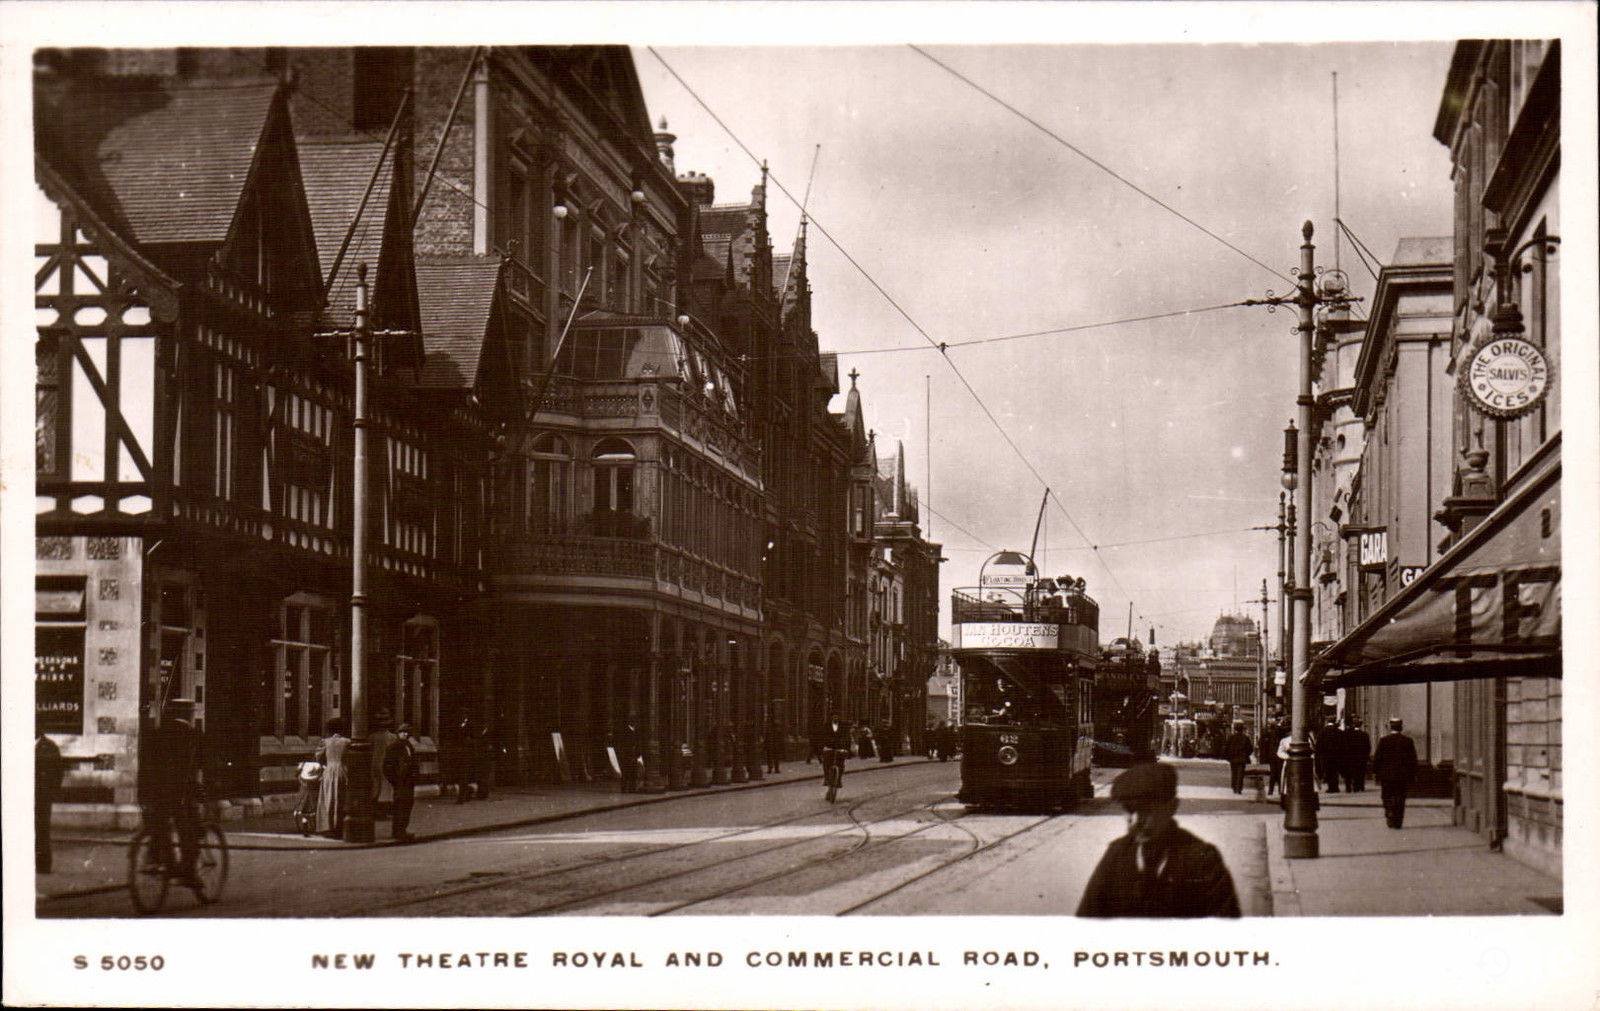 New Theatre Royal and Commercial Road